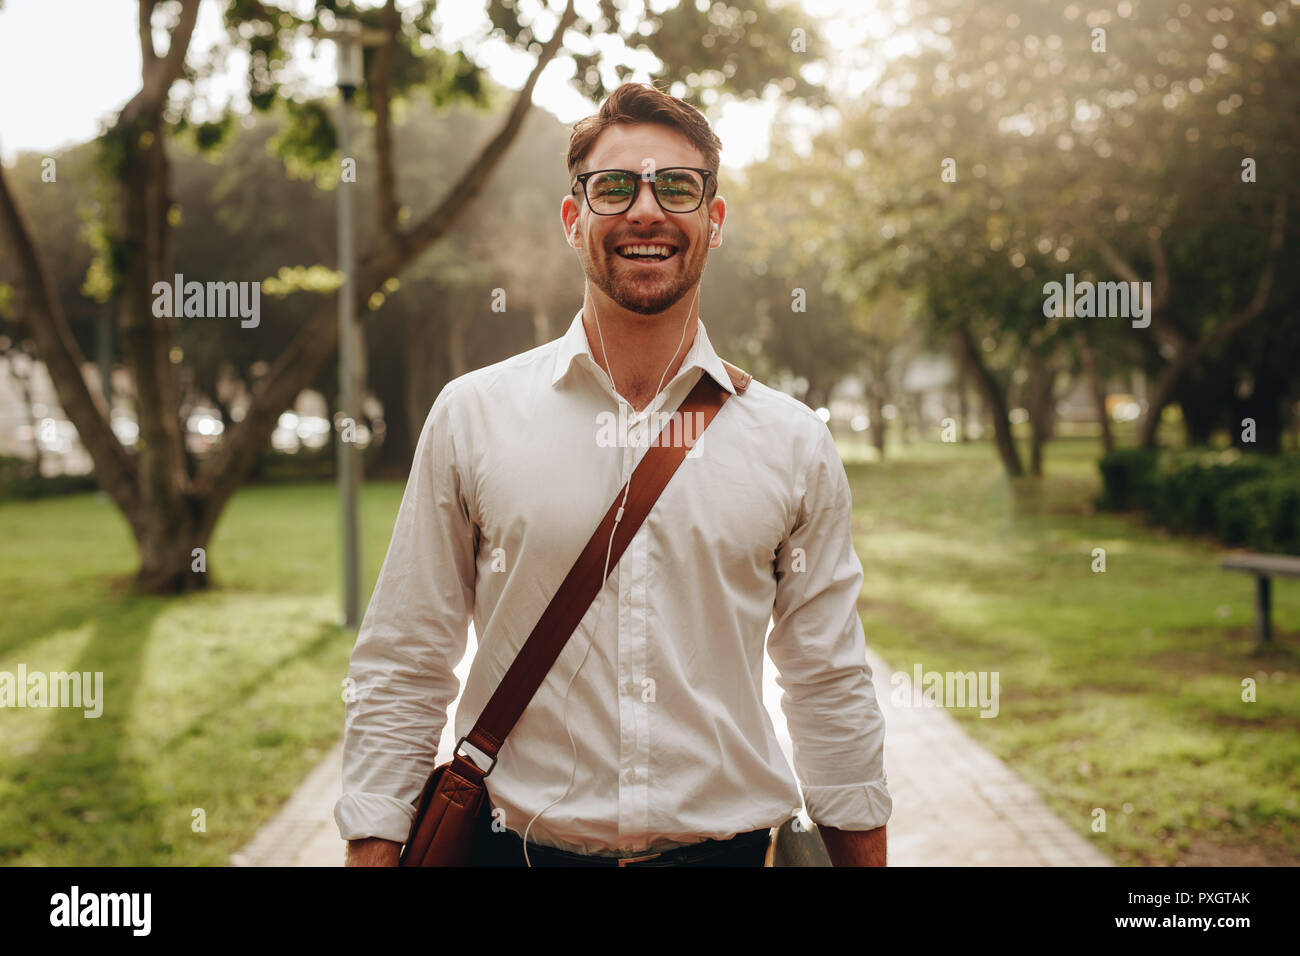 Man walking to office hanging an office bag on his shoulder. Smiling businessman going to office listening to music using earphones. Stock Photo